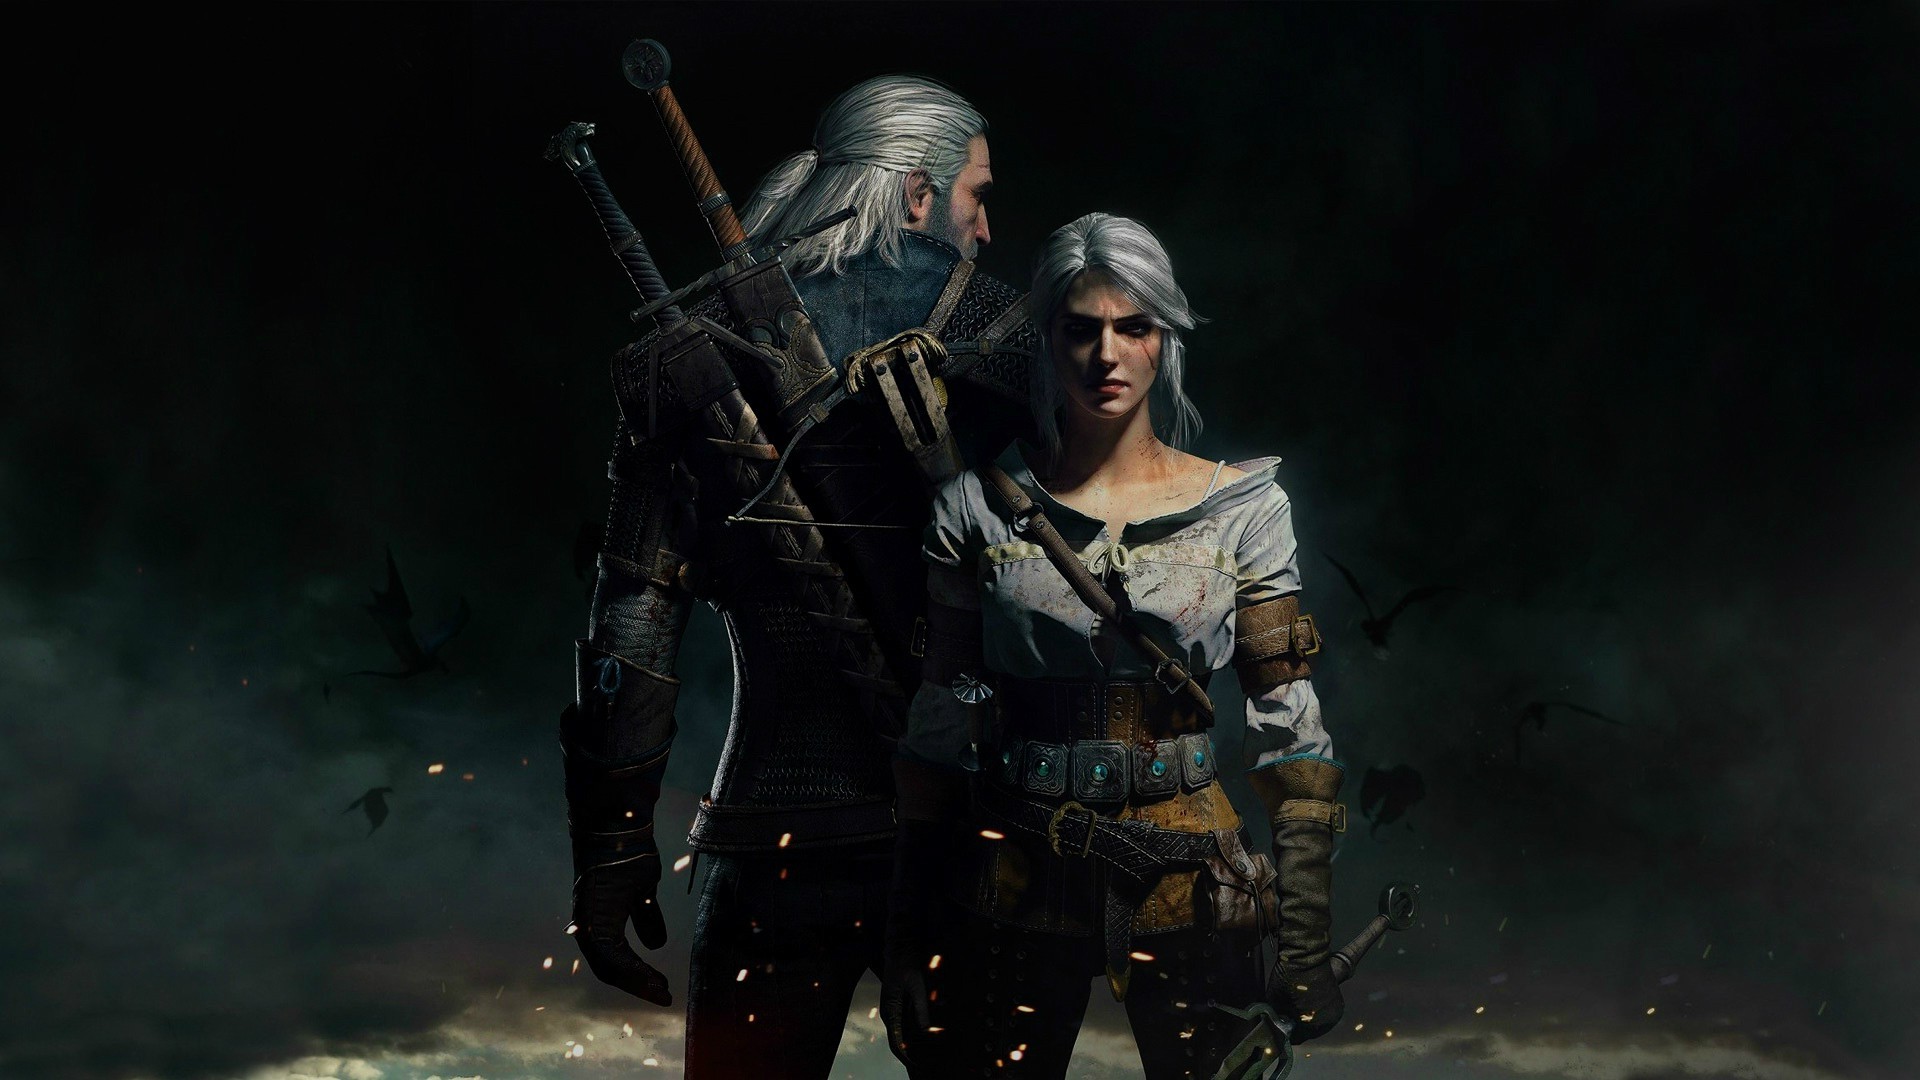 video Games, PC Gaming, The Witcher, Geralt Of Rivia, Cirilla Fiona Elen Riannon, The Witcher 3: Wild Hunt, Andrzej Sapkowski, RPG, CD Projekt RED Wallpaper